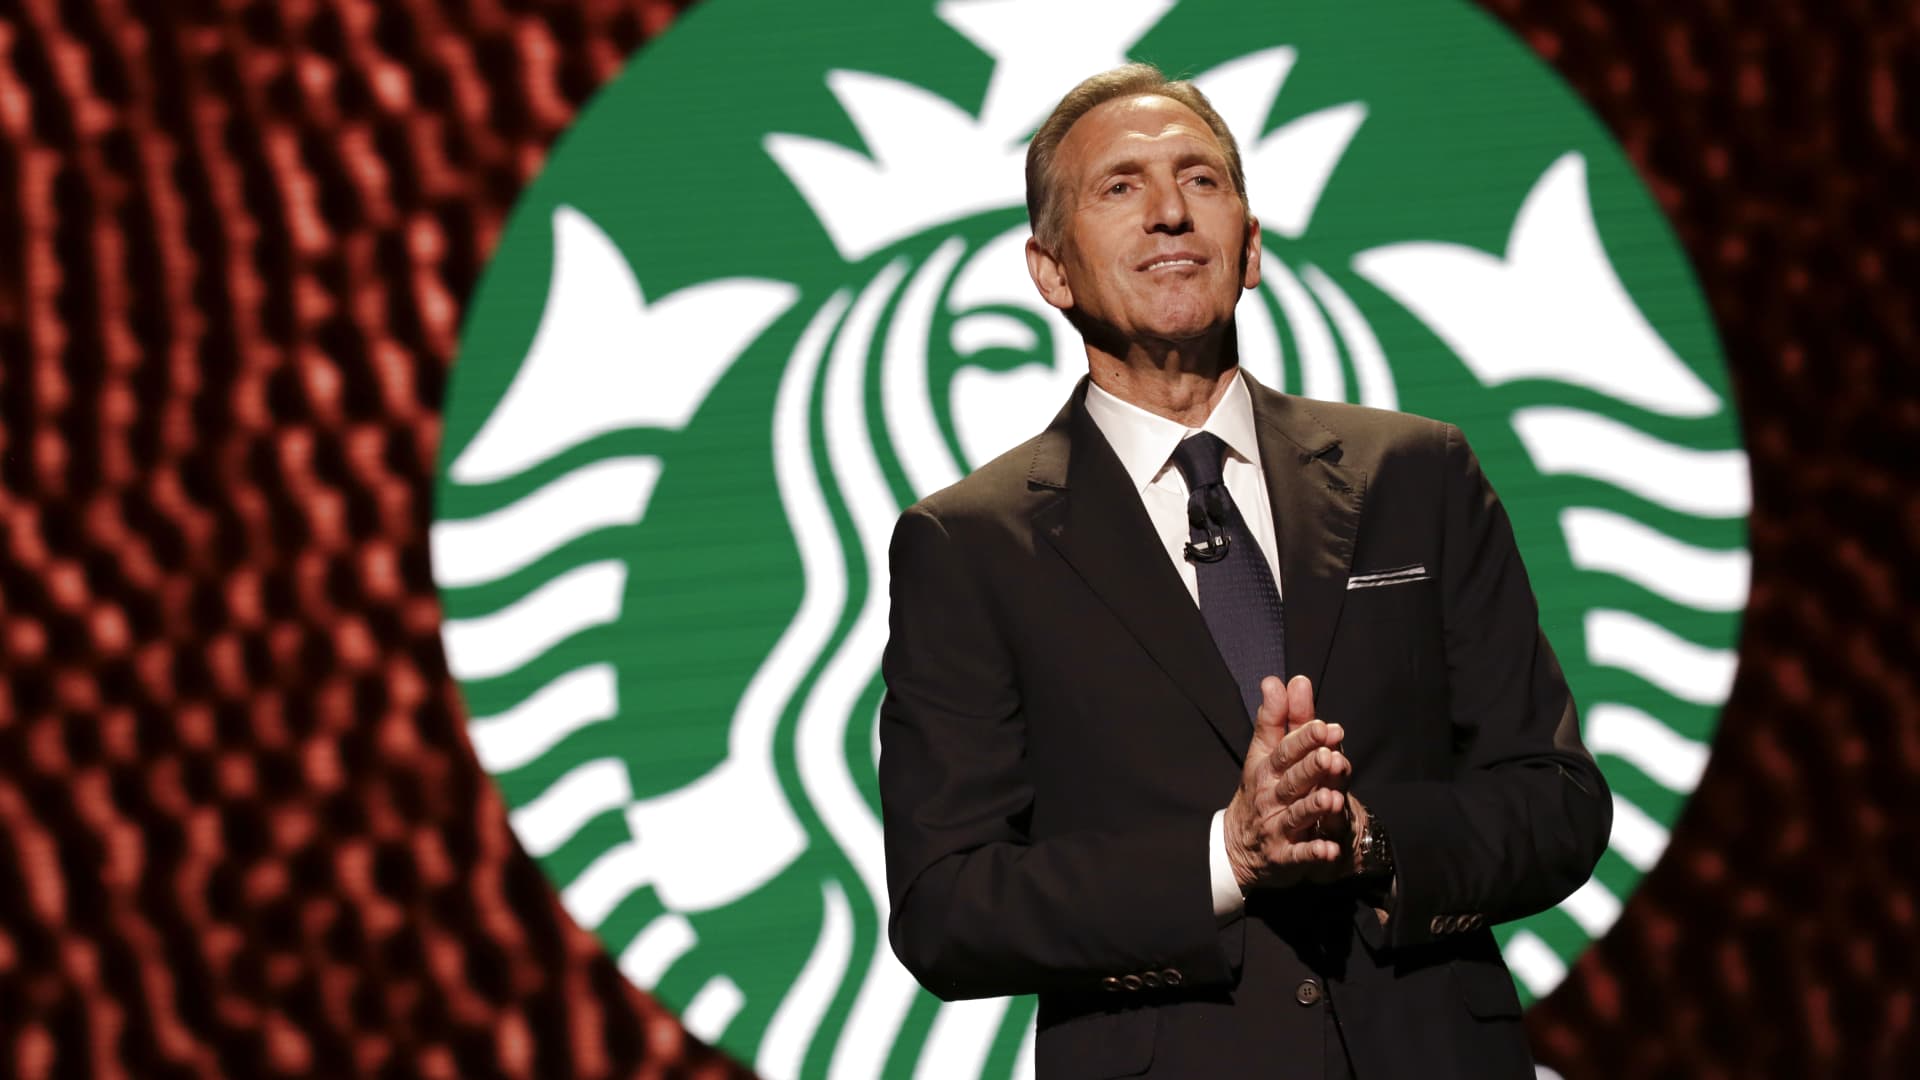 Starbucks outlines plans for automated ordering, new espresso tools, baristas